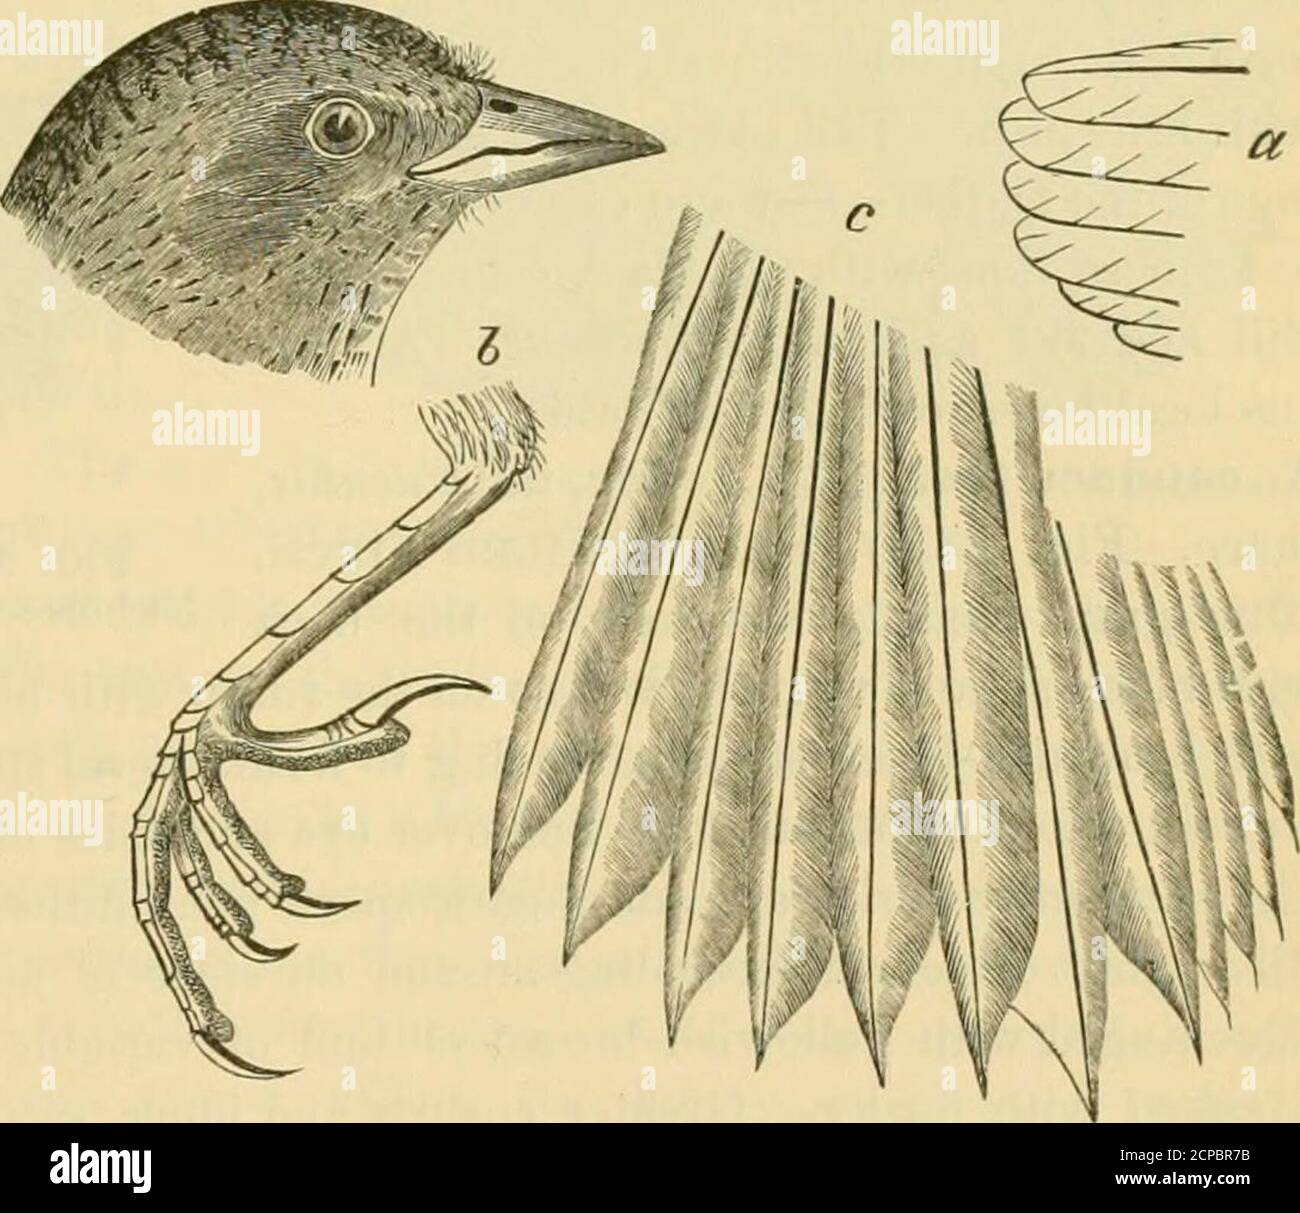 . Key to North American birds. Containing a concise account of every species of living and fossil bird at present known from the continent north of the Mexican and United States boundary, inclusive of Greenland and Lower California, with which are incorporated General ornithology: an outline of the structure and classification of birds; and Field ornithology, a manual of collecting, preparing, and preserving birds . rt, their claws underreachingbase of middle claw. Tail shorter ornot longer than wings, much rounded,of narrow, stiffish, sharp-pointed feath-ers. Embracing small streaky marshspar Stock Photo